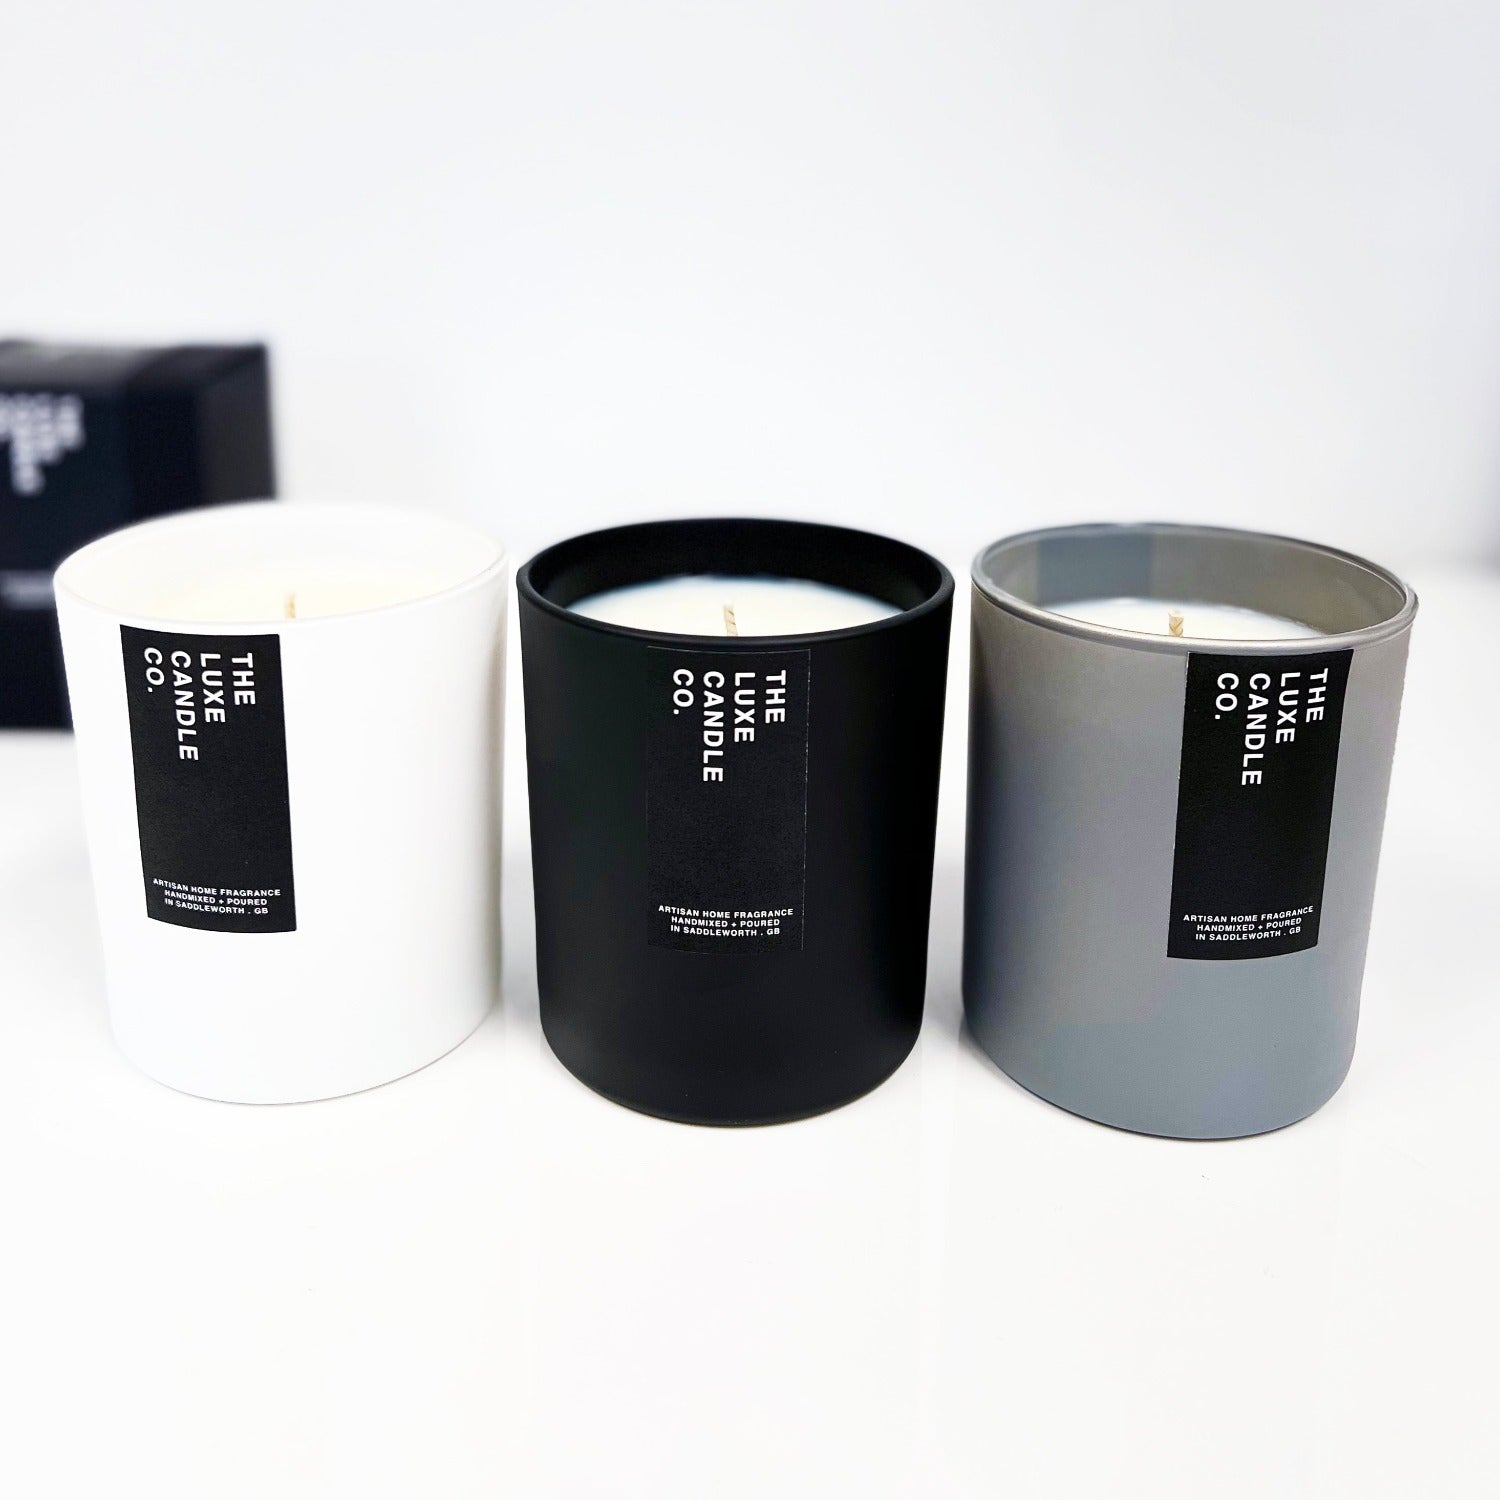 Scented candles UK - Coconut - white black grey glass